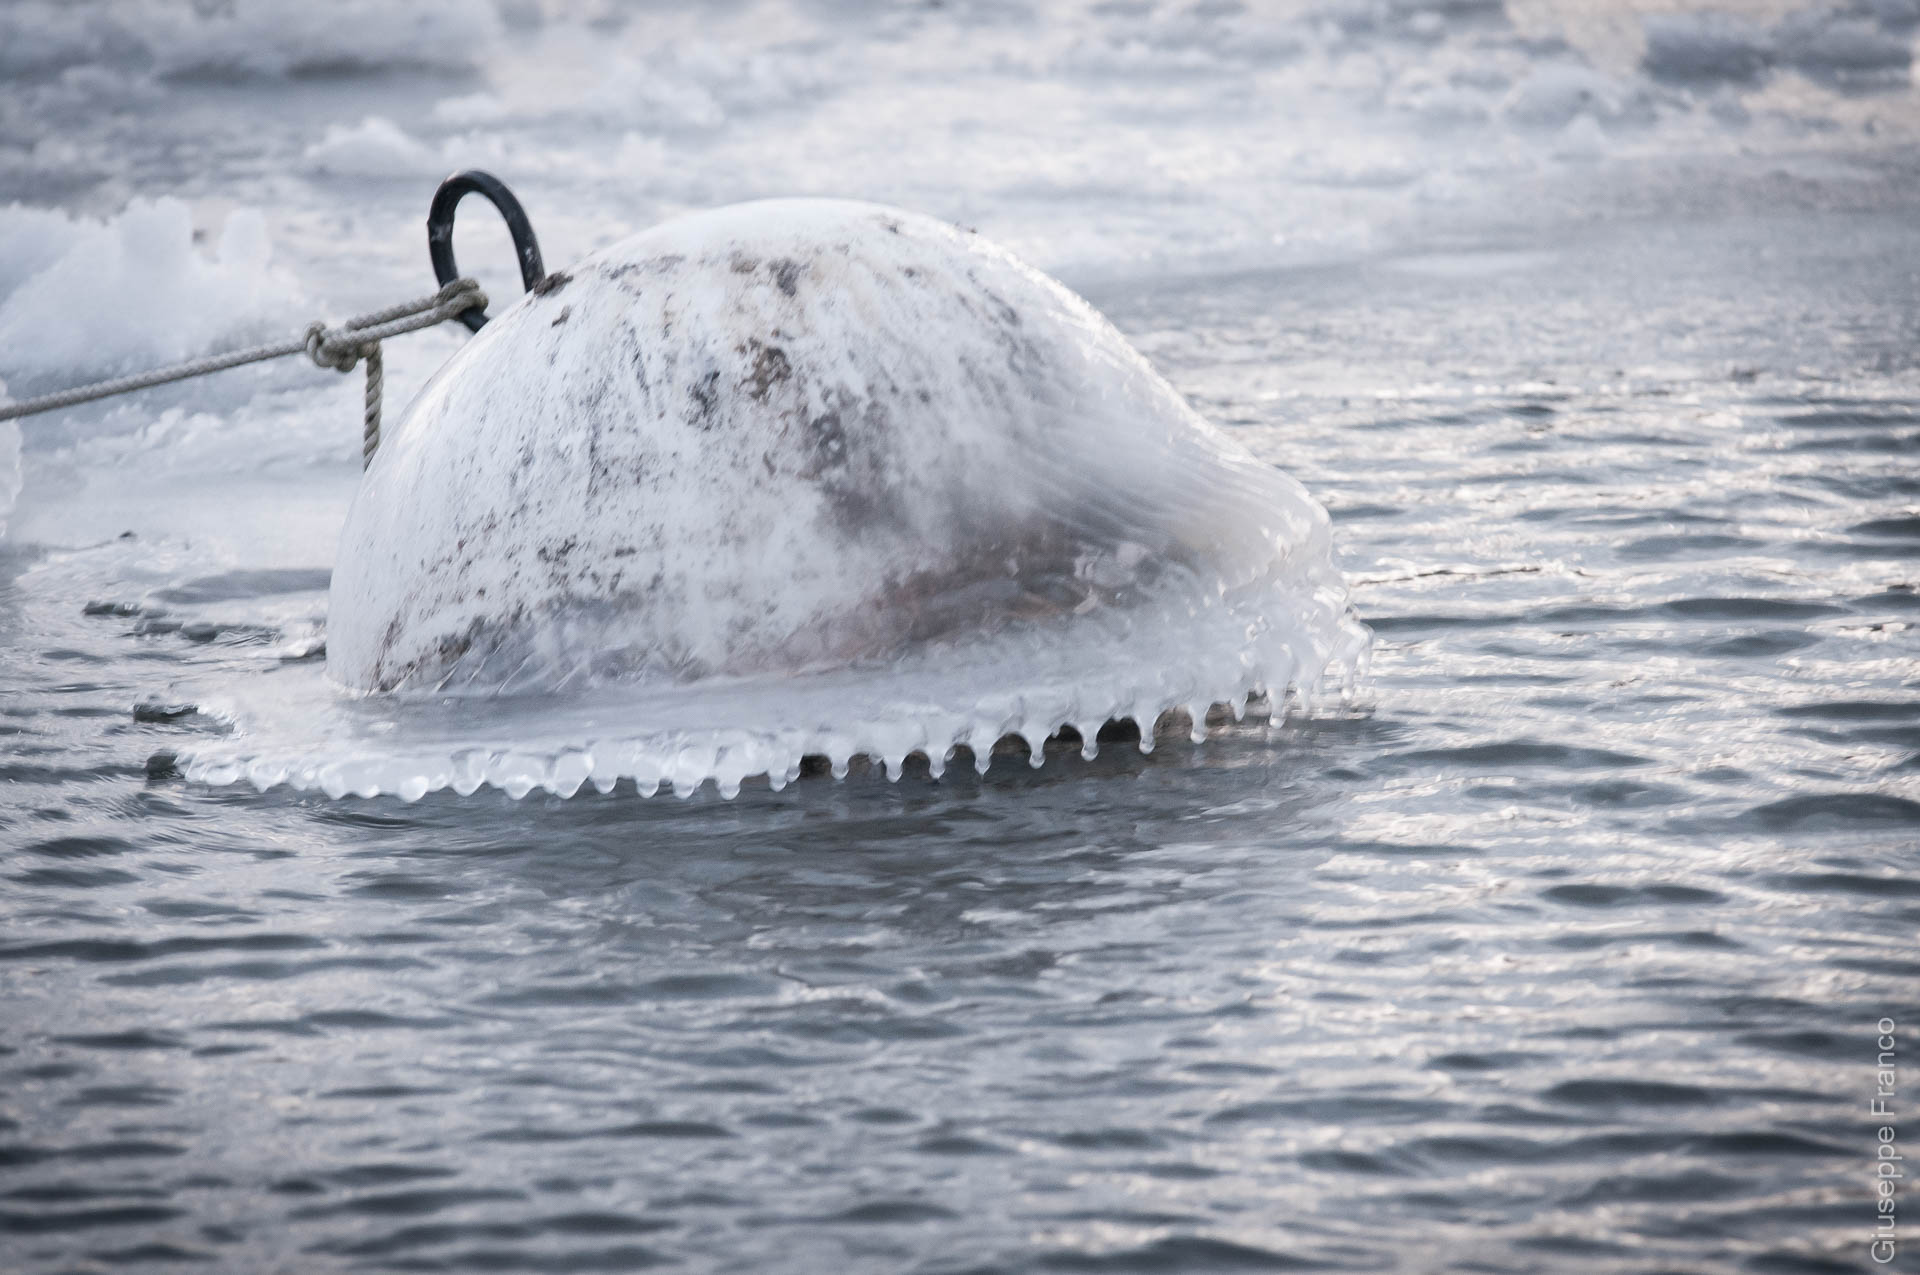 This buoy covered by ice shows an amazing pattern of drops on the side.